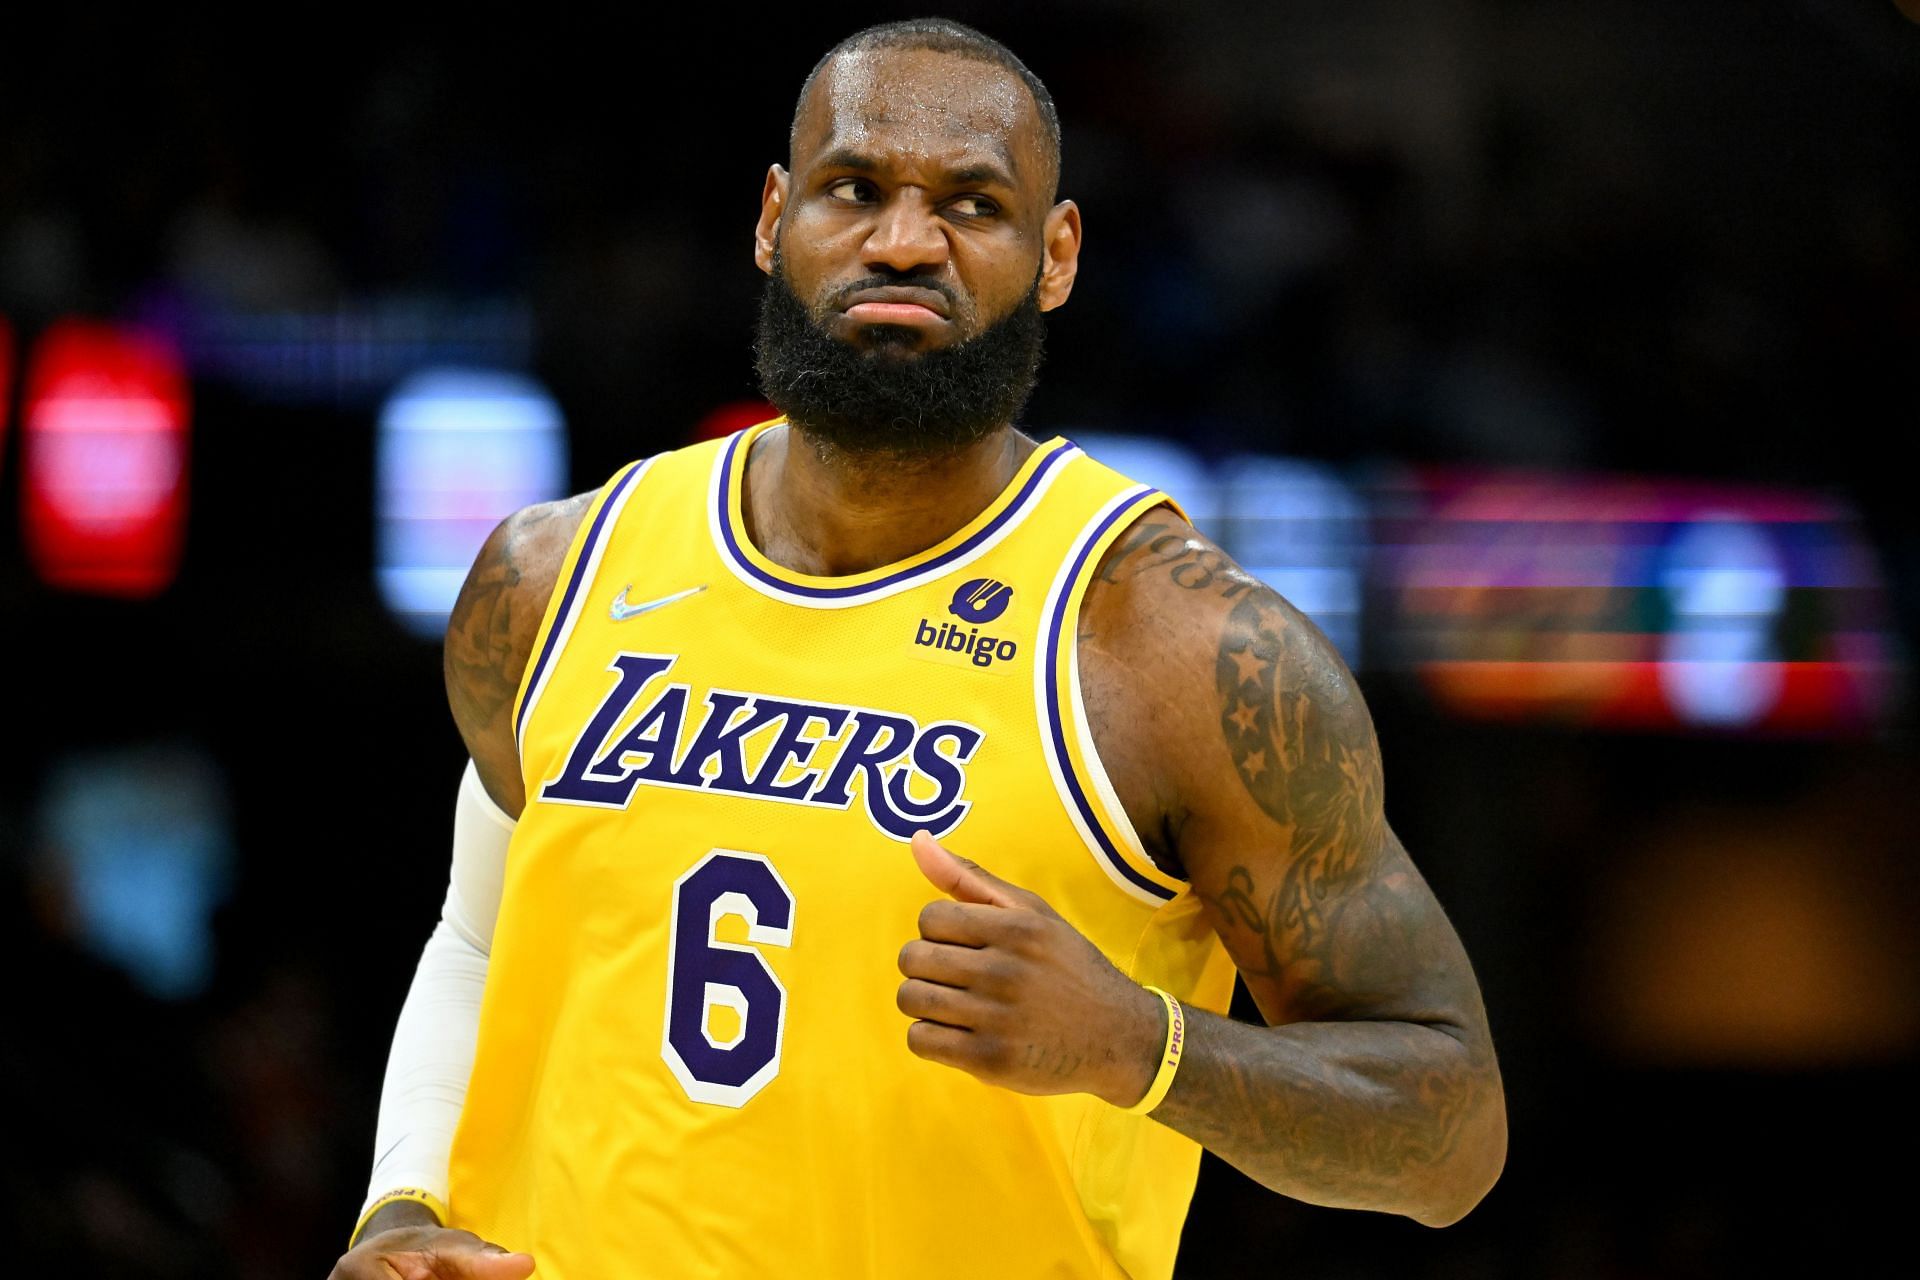 LeBron James in action during Los Angeles Lakers v Cleveland Cavaliers